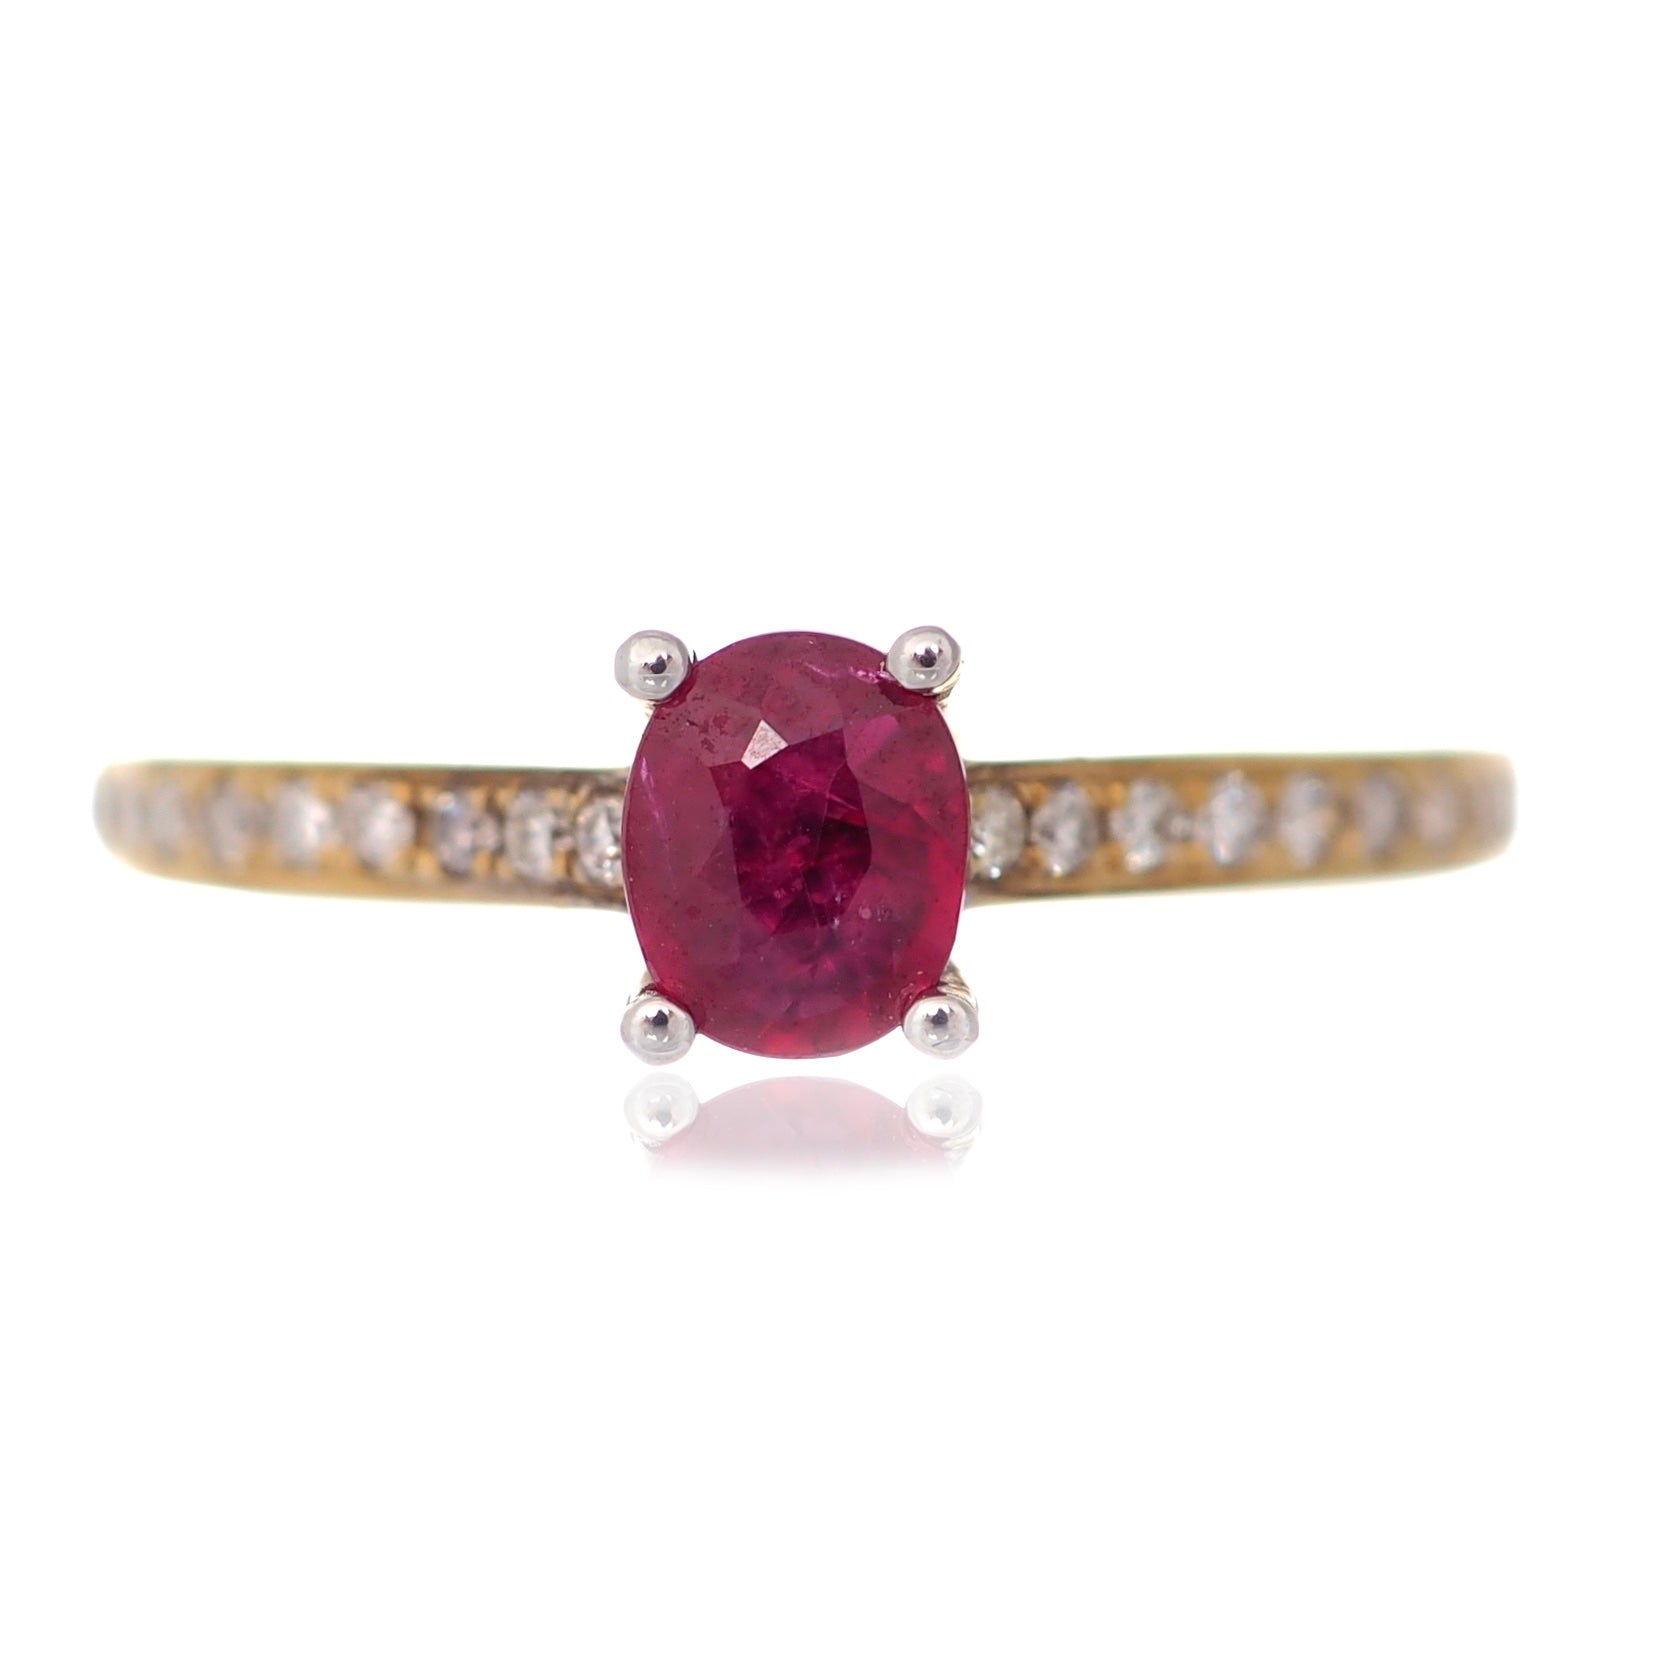 Oval Ruby solitaire engagement ring diamond shoulders yellow gold Harrogate jewellers Fogal and barnes